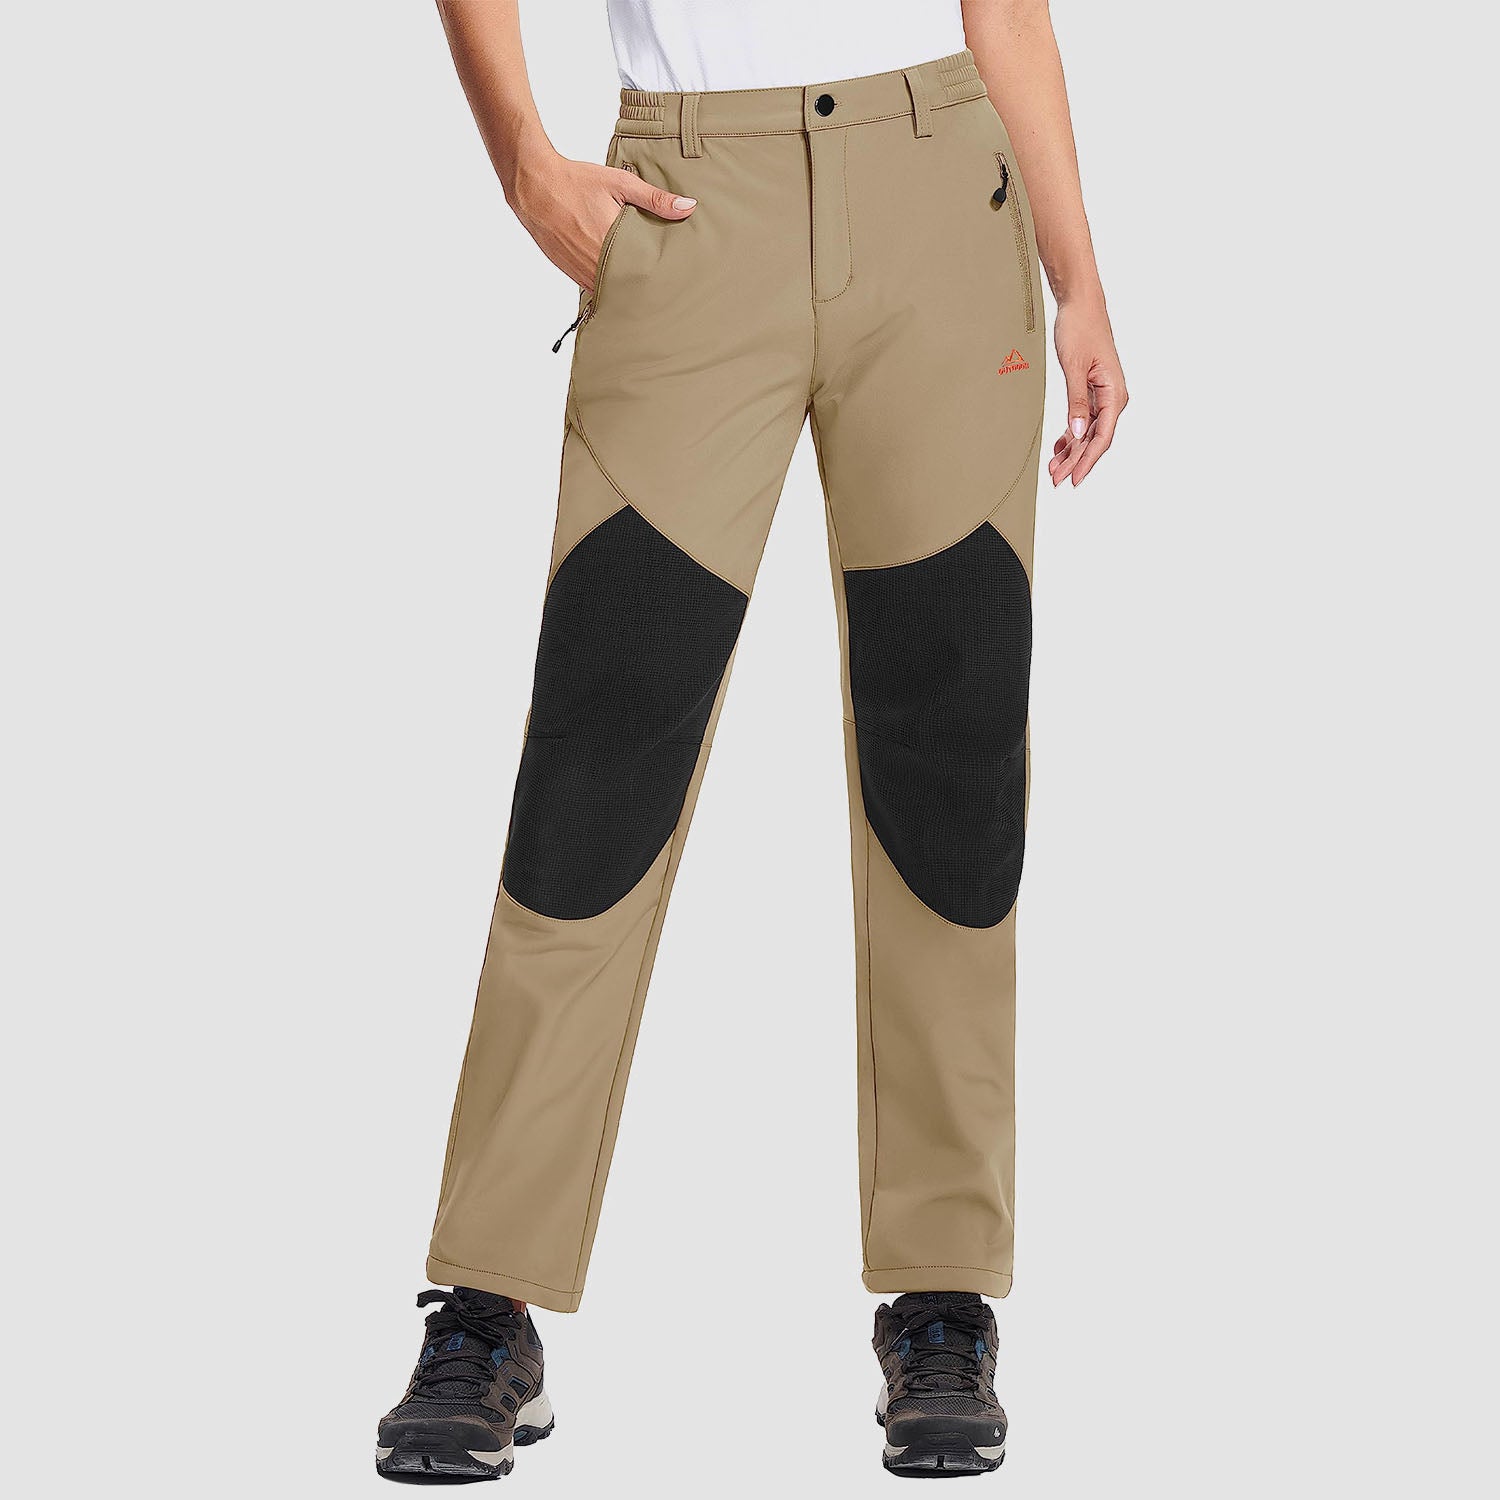 Women's Hiking Pants Fleece Lined Warm Pant with Articulated Knee